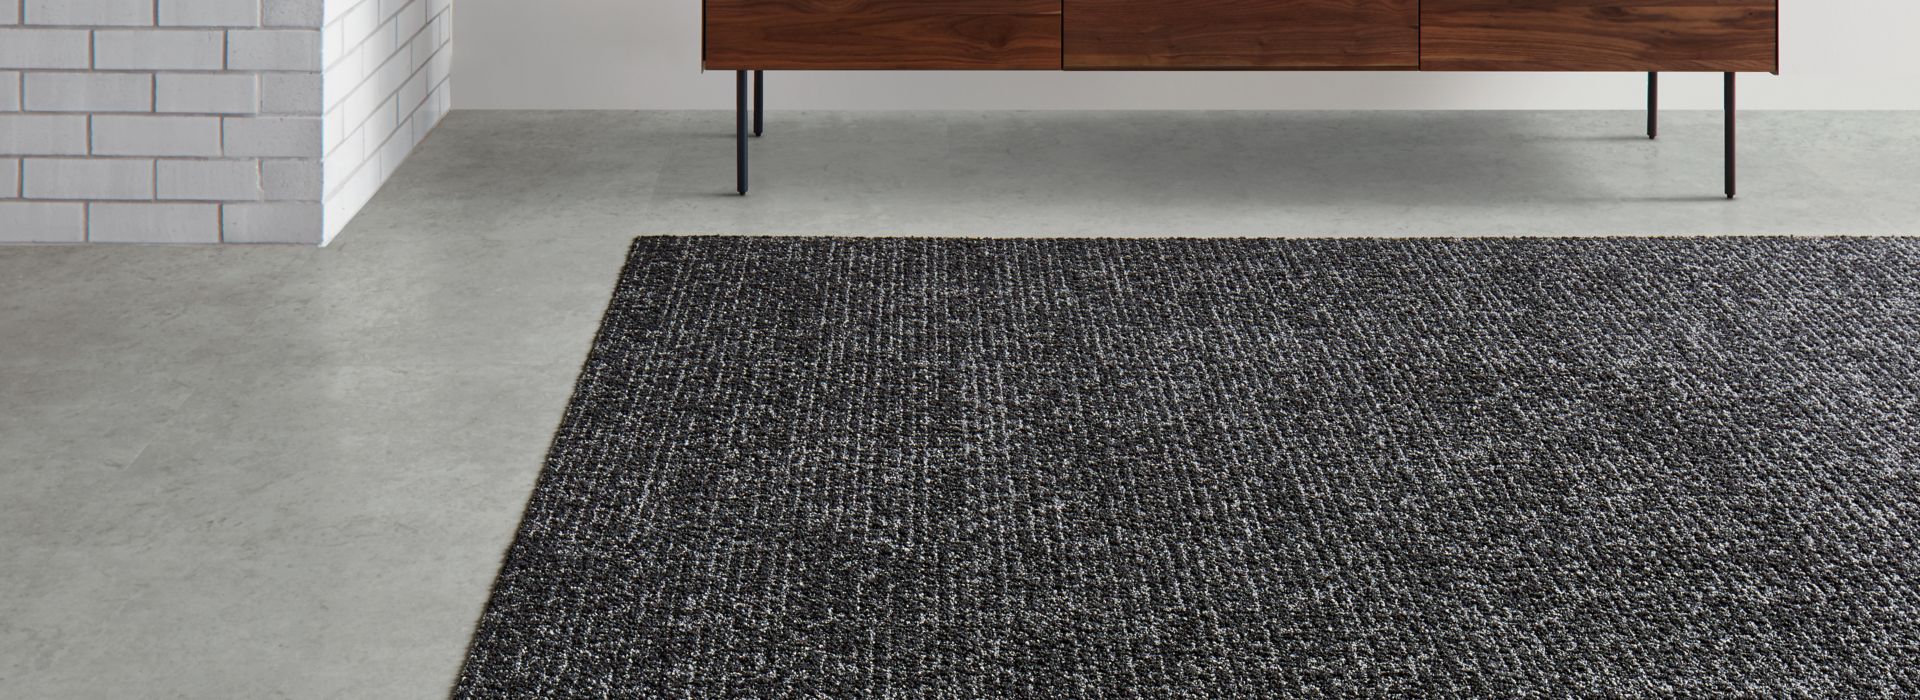 Interface Classic Seven carpet tile with Textured Stones LVT in lobby area 